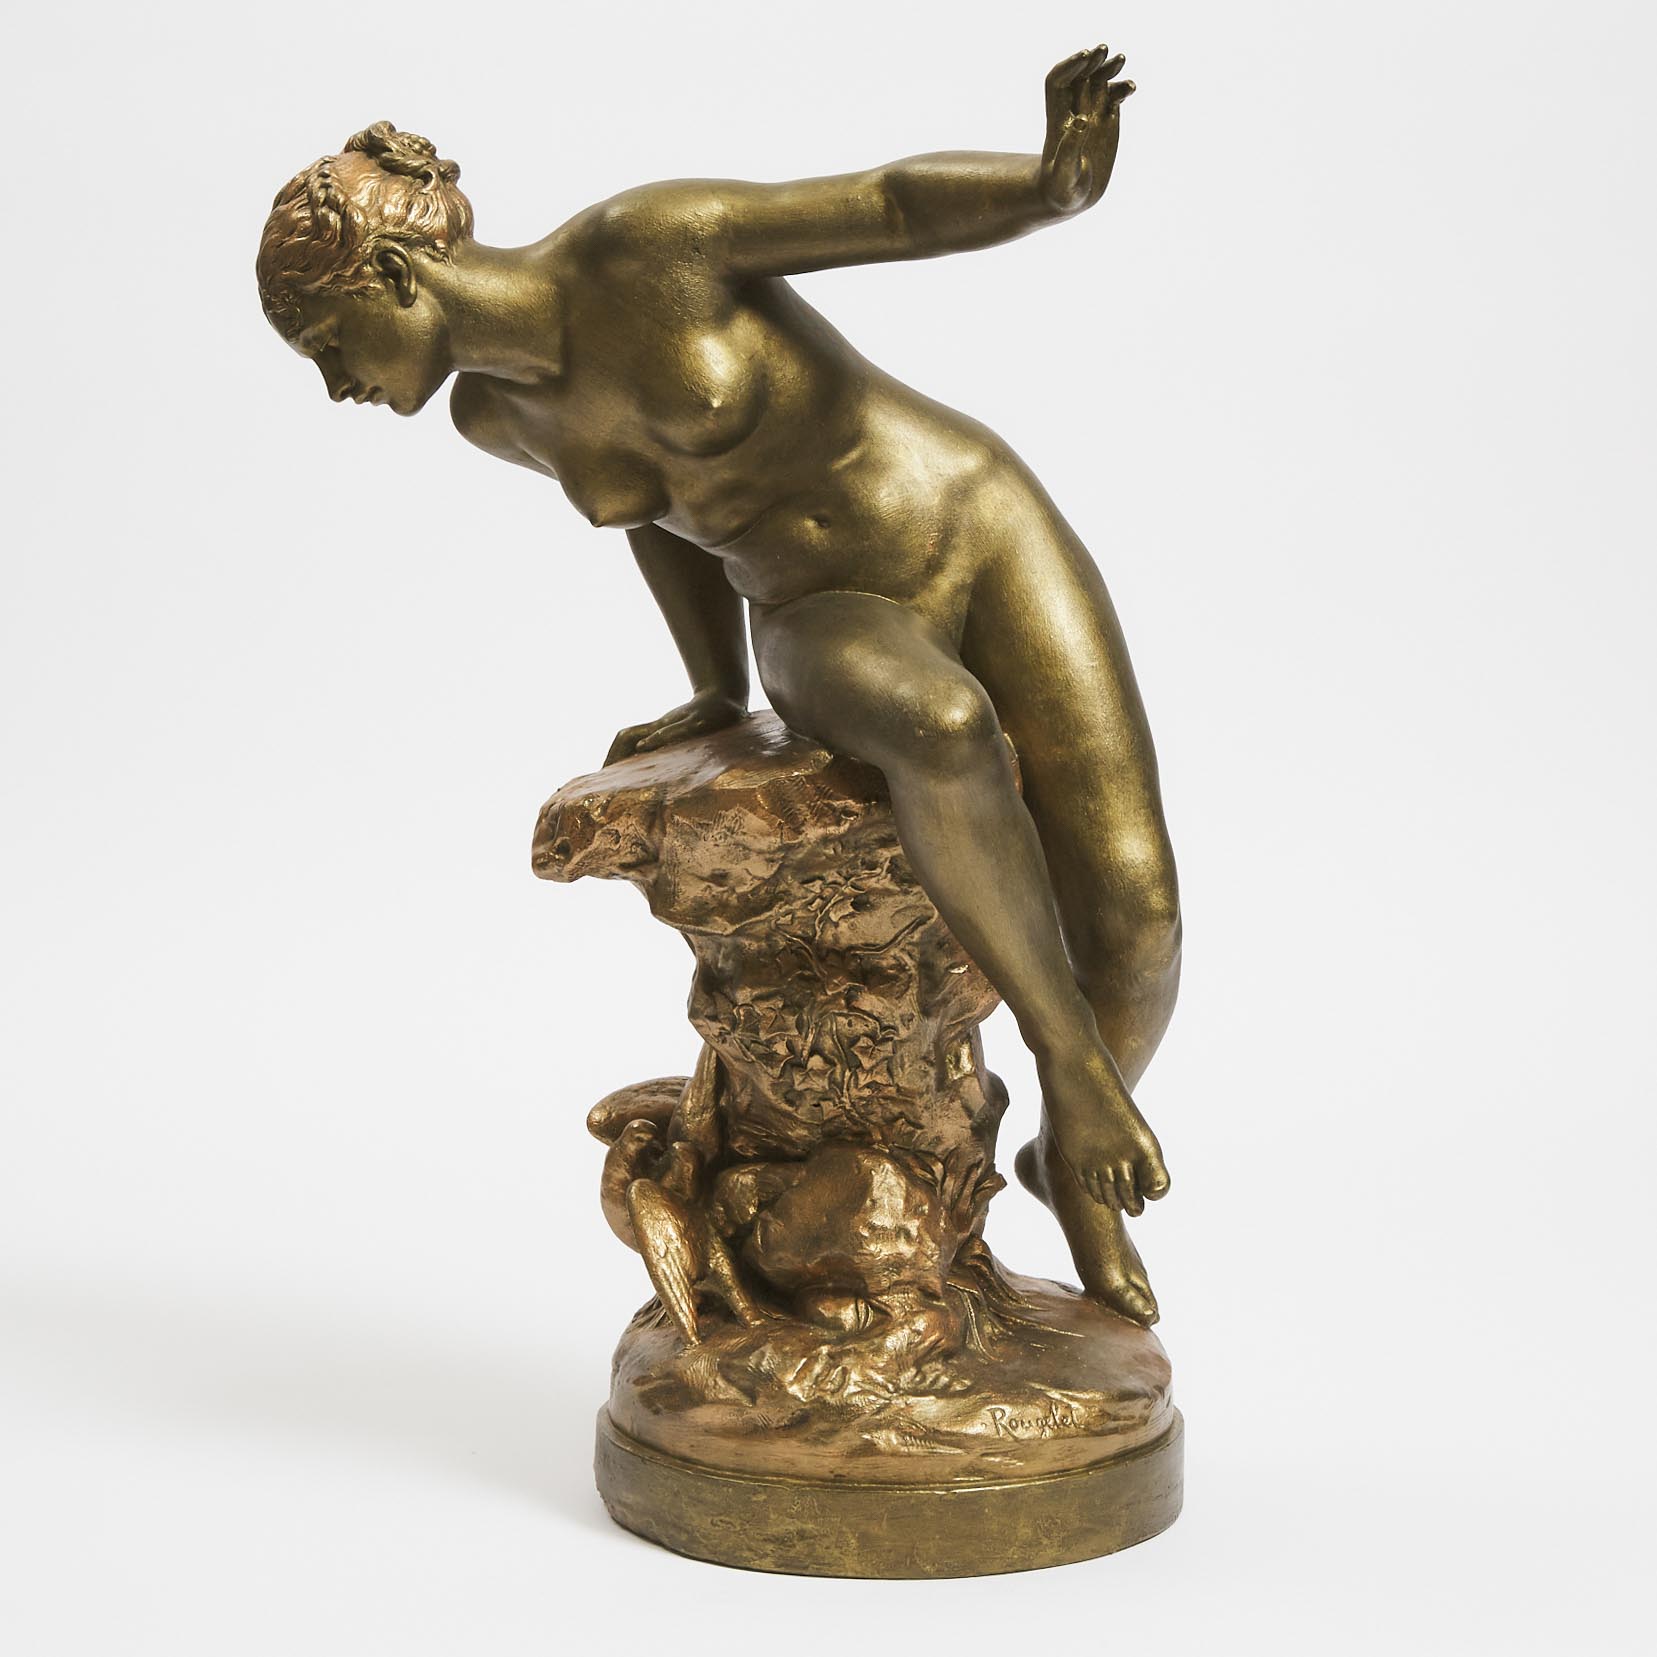 Patinated Terracotta Figure of a Bather Seated on a Rock Observing Doves, after Benoit Rougelet (French, 1834-1894)